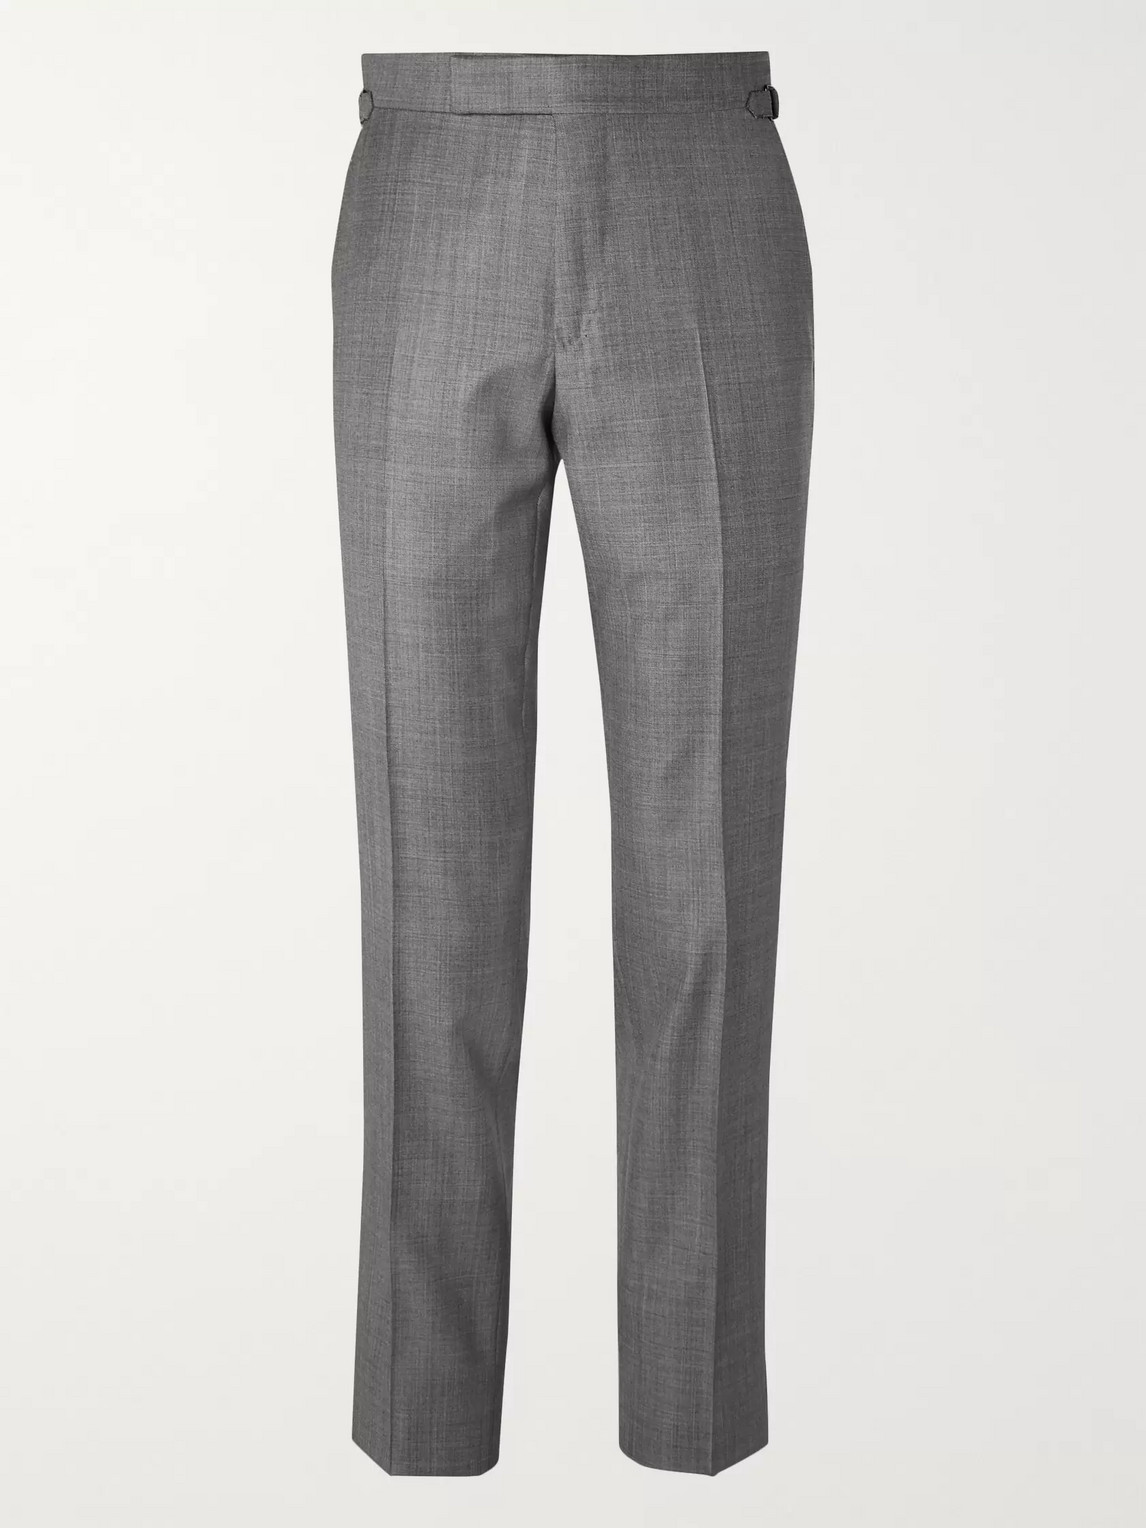 TOM FORD SLIM-FIT SUPER 110S SHARKSKIN WOOL SUIT TROUSERS